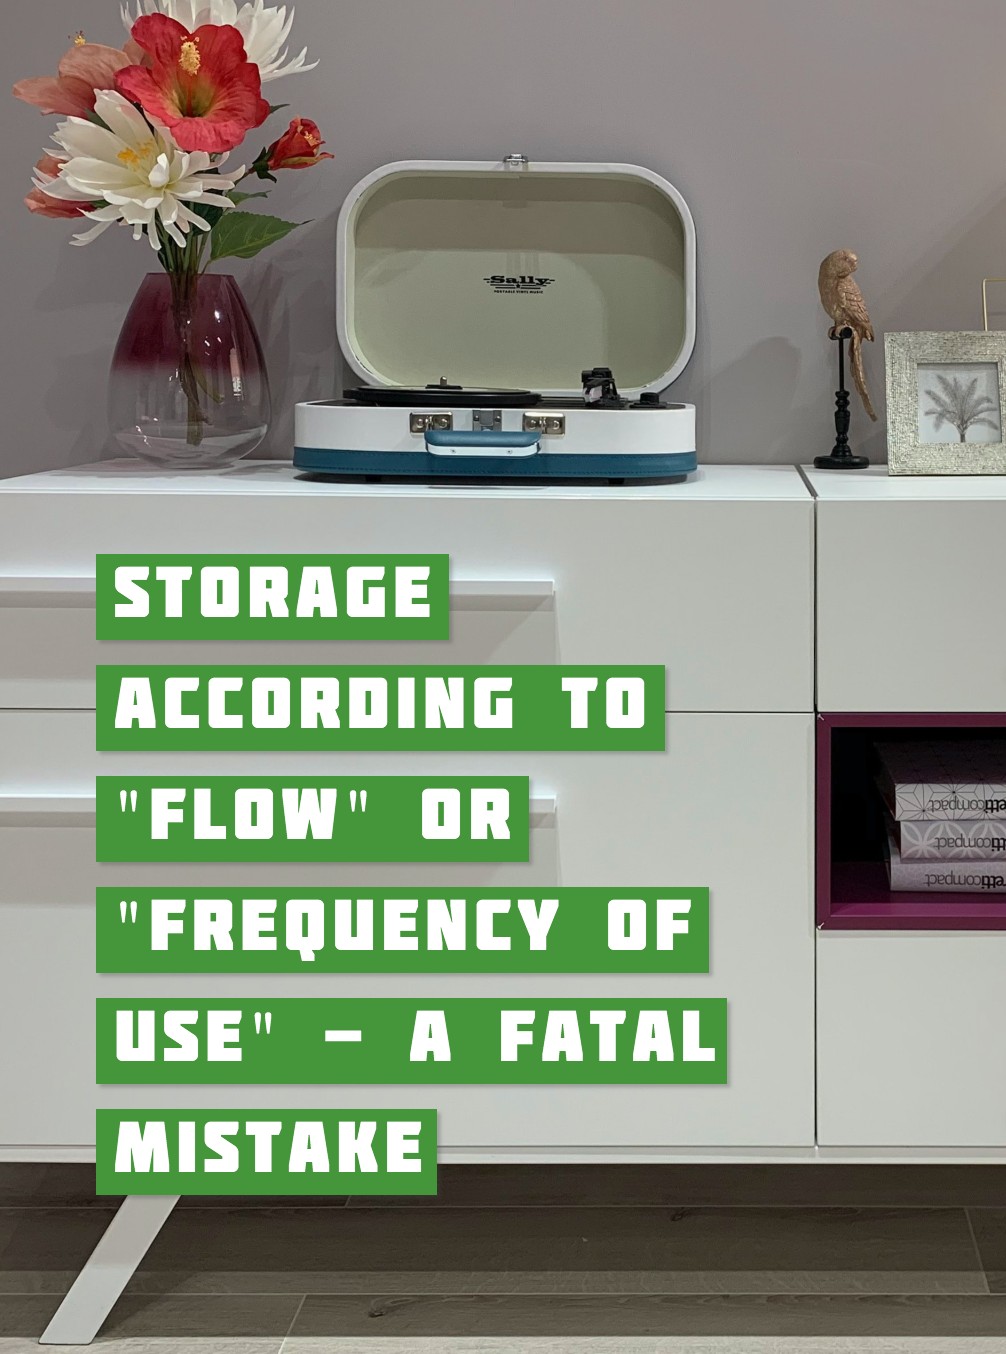 Storage According To Flow Or Frequency Of Use Fatal Mistake